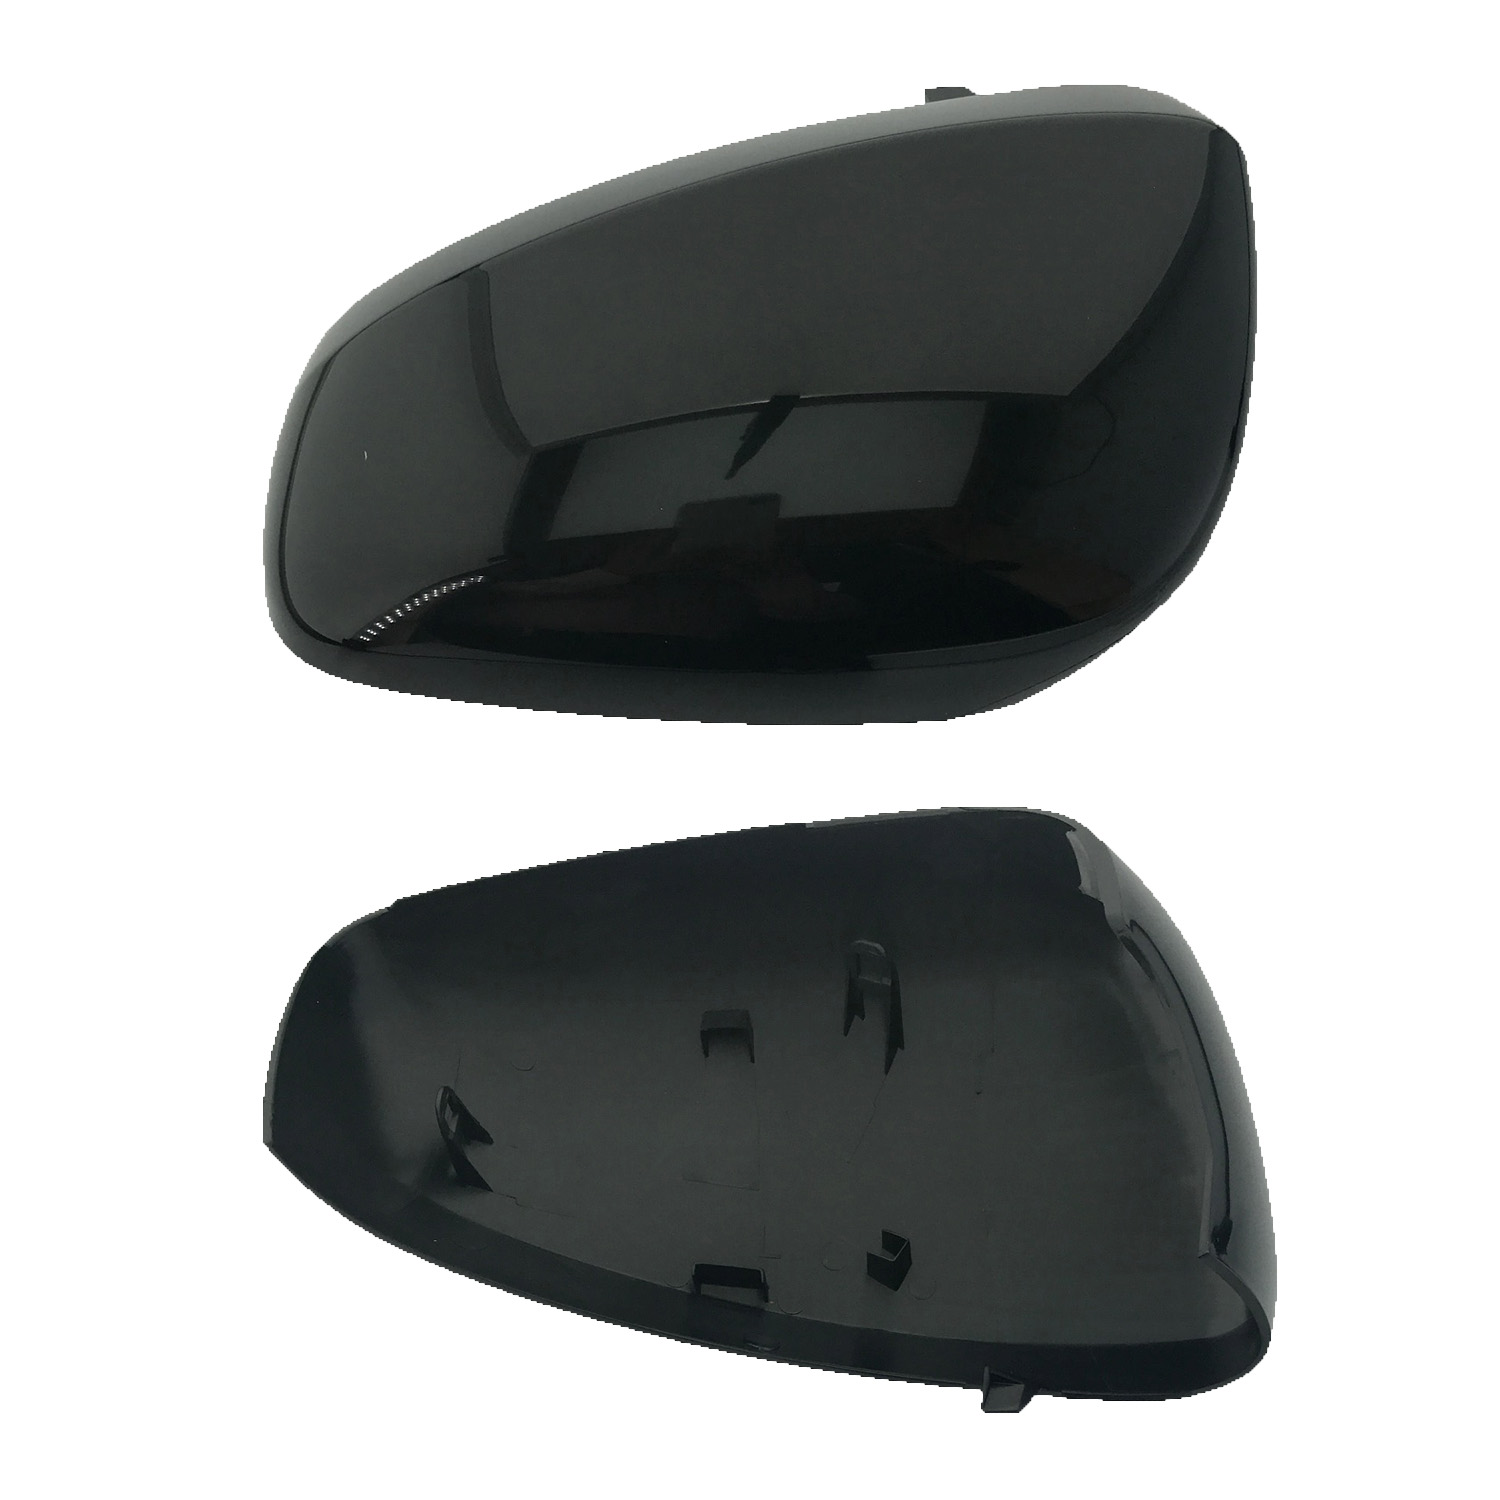 Low Price Guarantee on renault scenic Wing Mirror Replacements